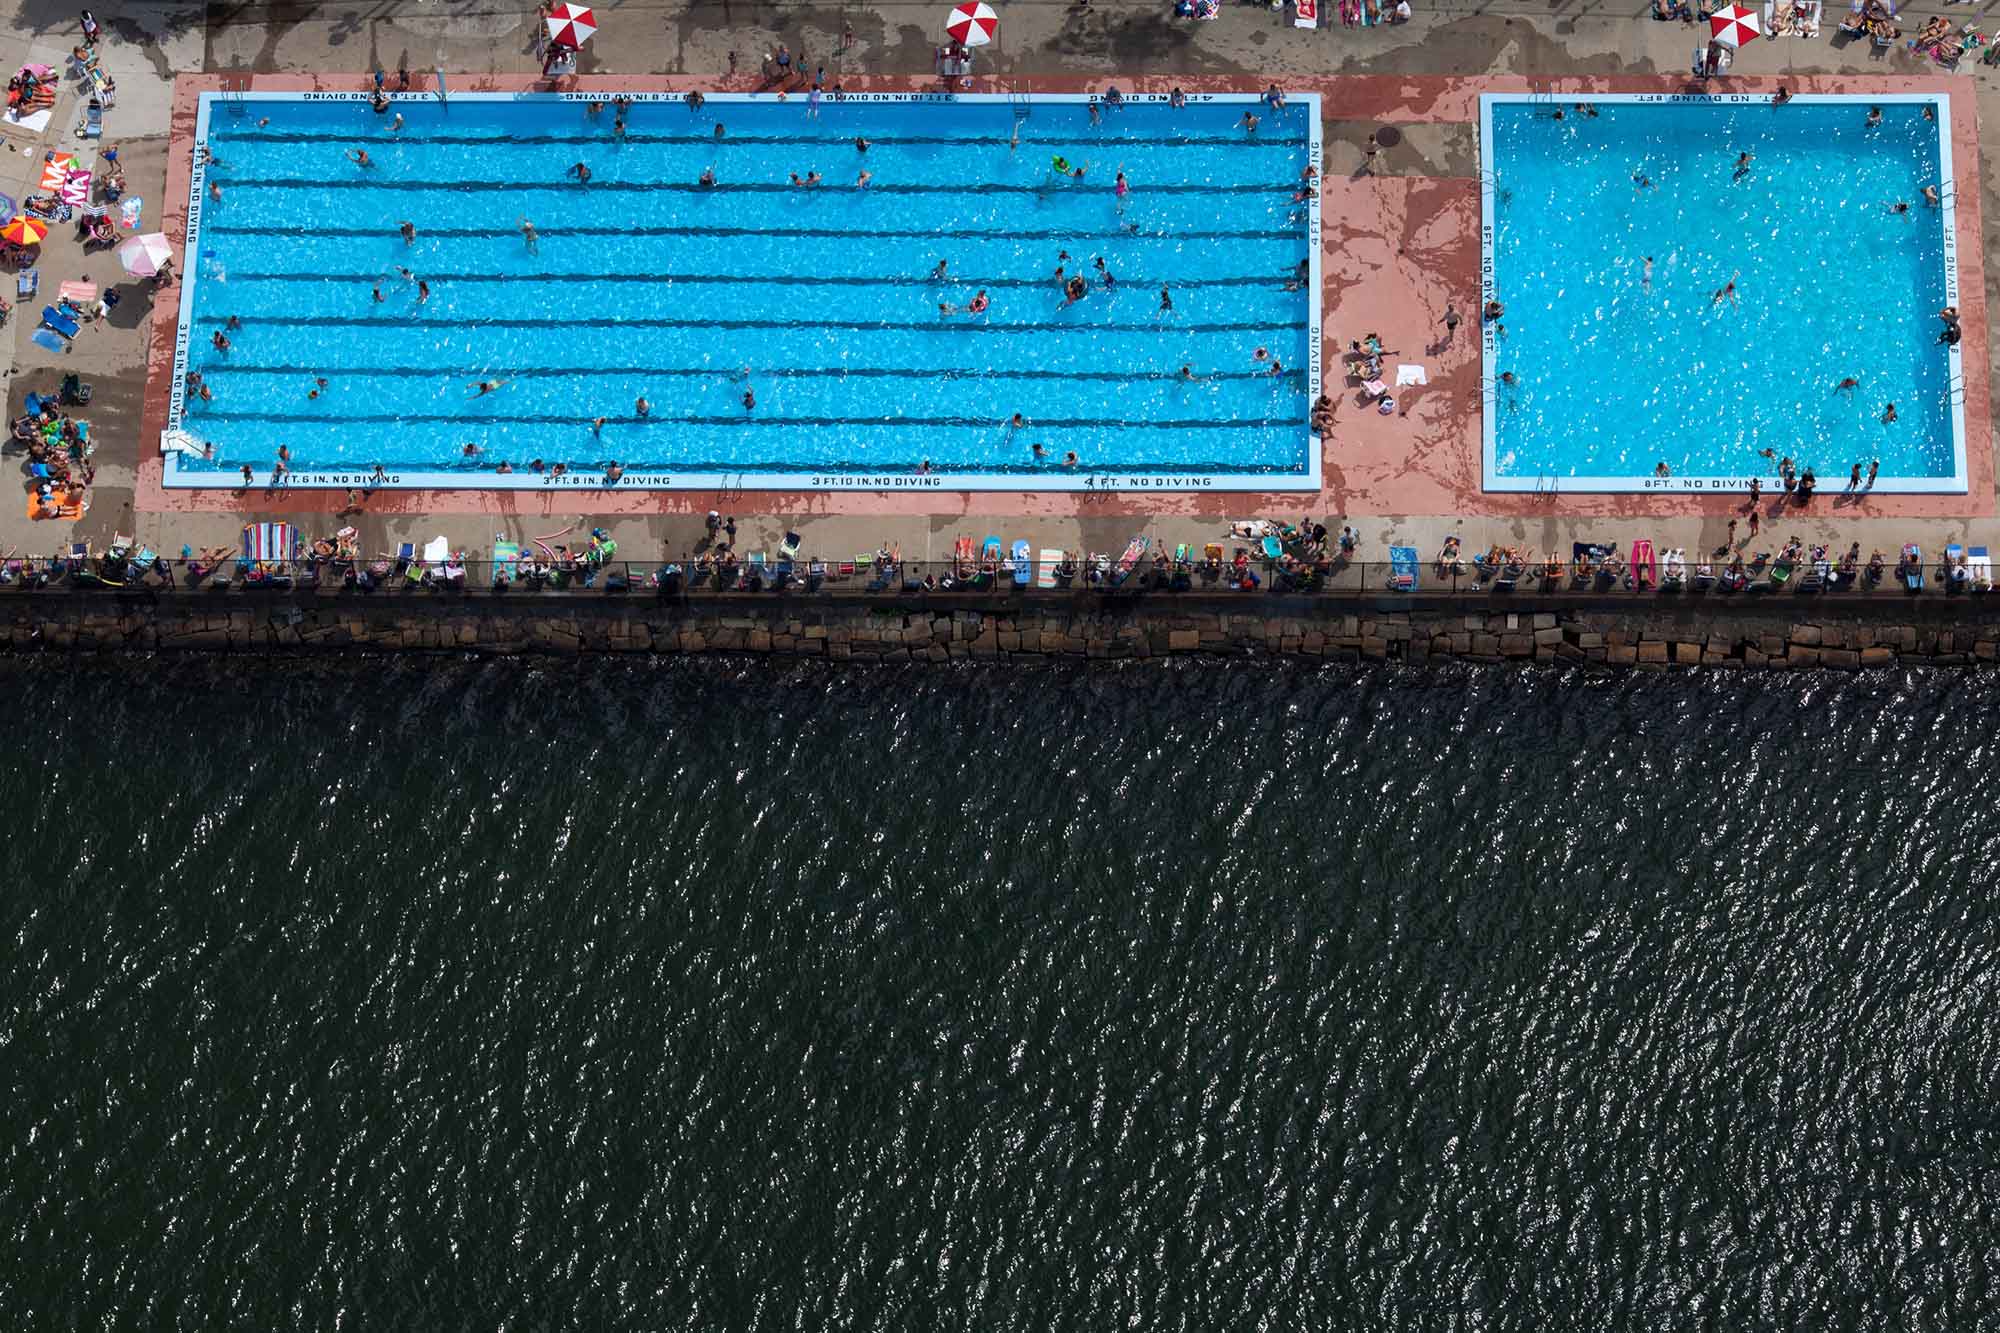 Alex MacLean, 'Pool Next to the Charles River, Cambridge, MA 2012'